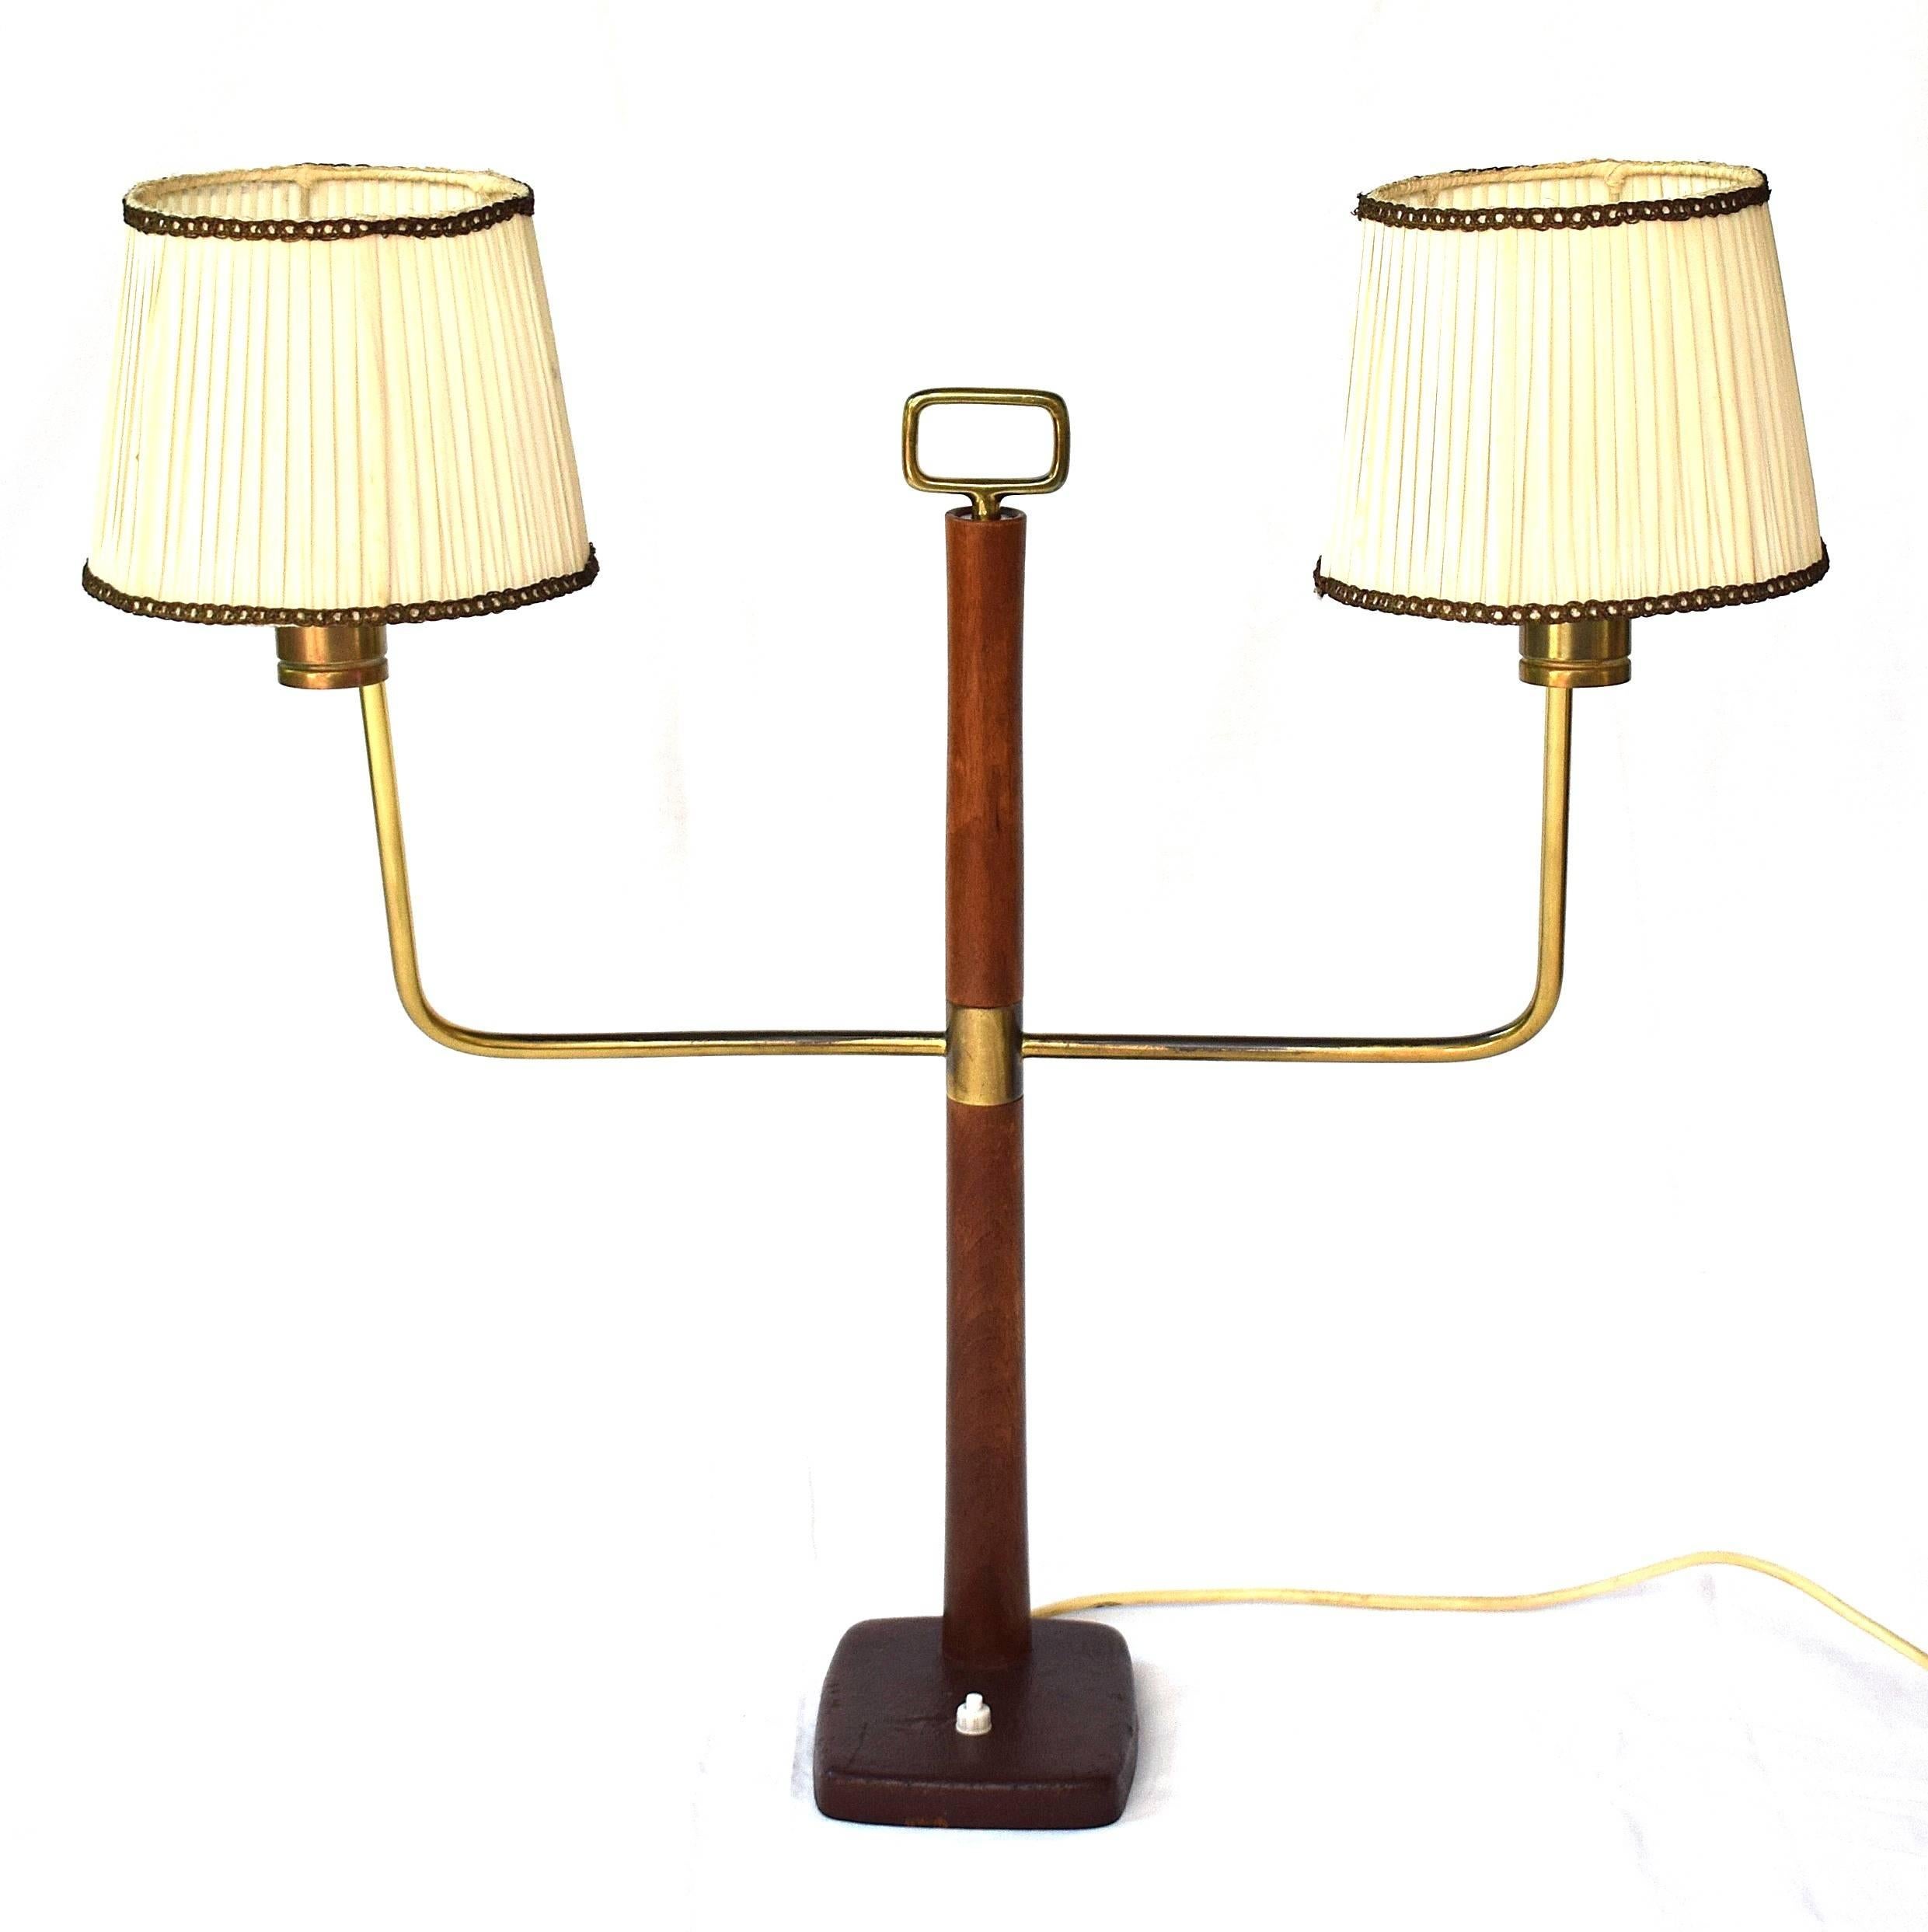 Execution J. T. Kalmar, Vienna, circa 1935, for Haus & Garten, Vienna. Brass and fruitwood, Stand covered with leather, two brass arms, two original silk fabric lampshades.

A very rare and typical product of the Austrian Werkbund: high-quality